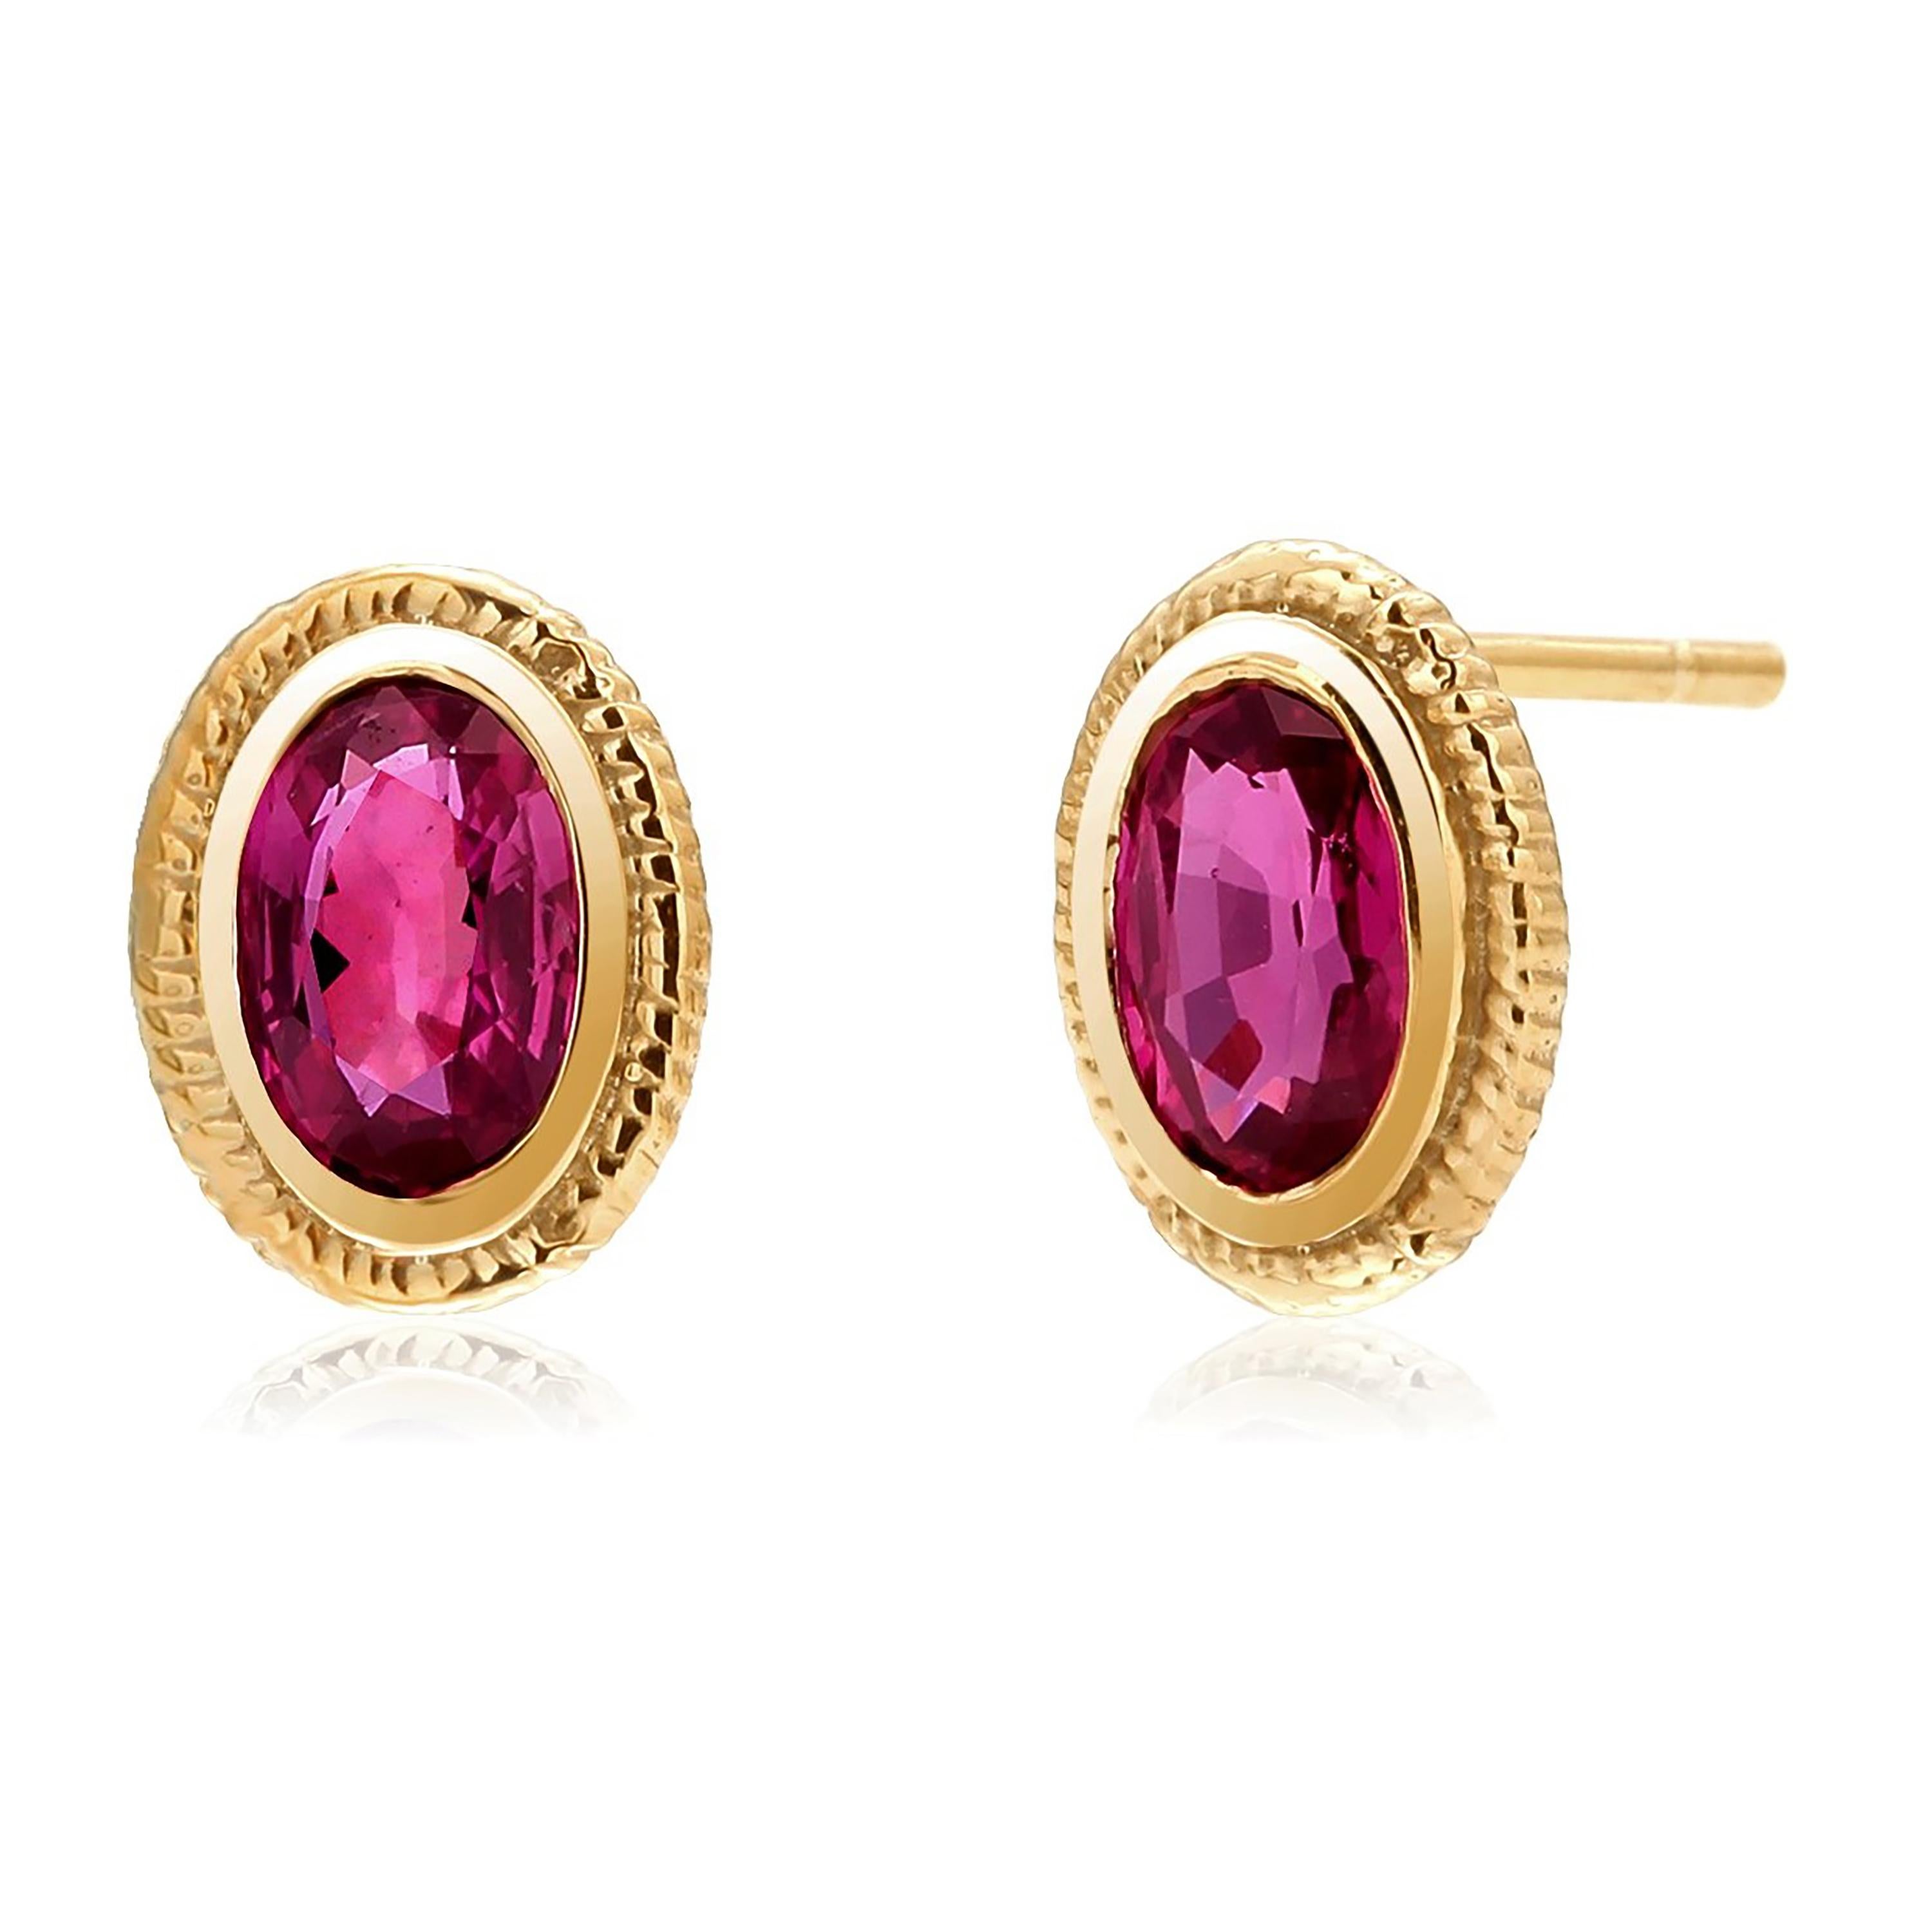 Contemporary Oval Ruby Bezel Set Yellow Gold Twisted Design Stud Earrings